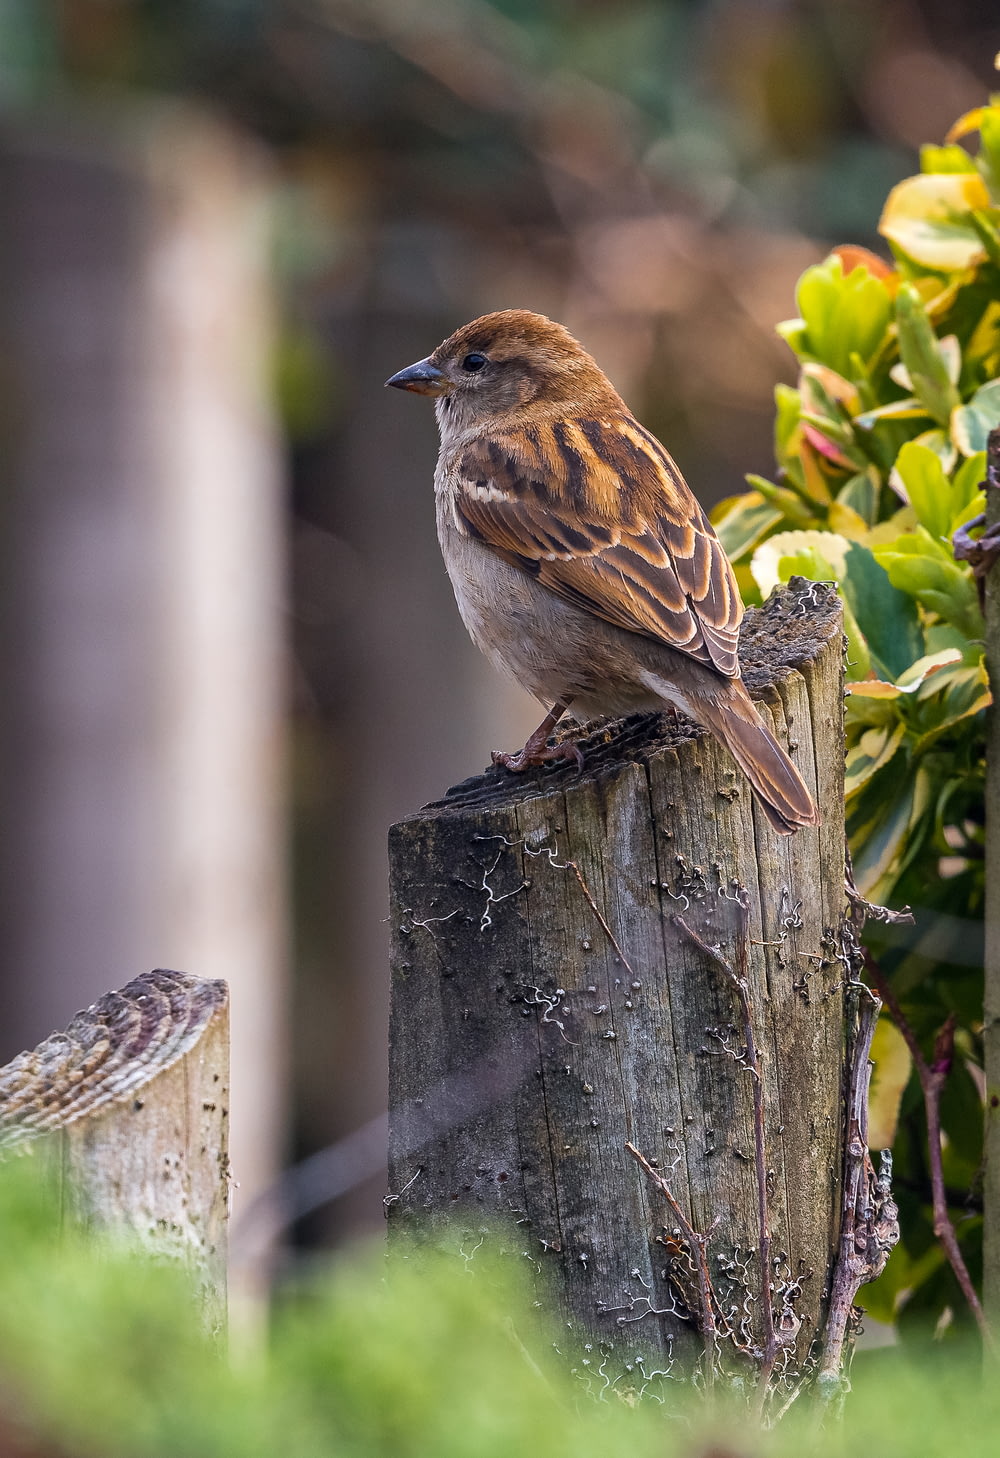 brown bird in a wood near a plant during daytime close-up photography